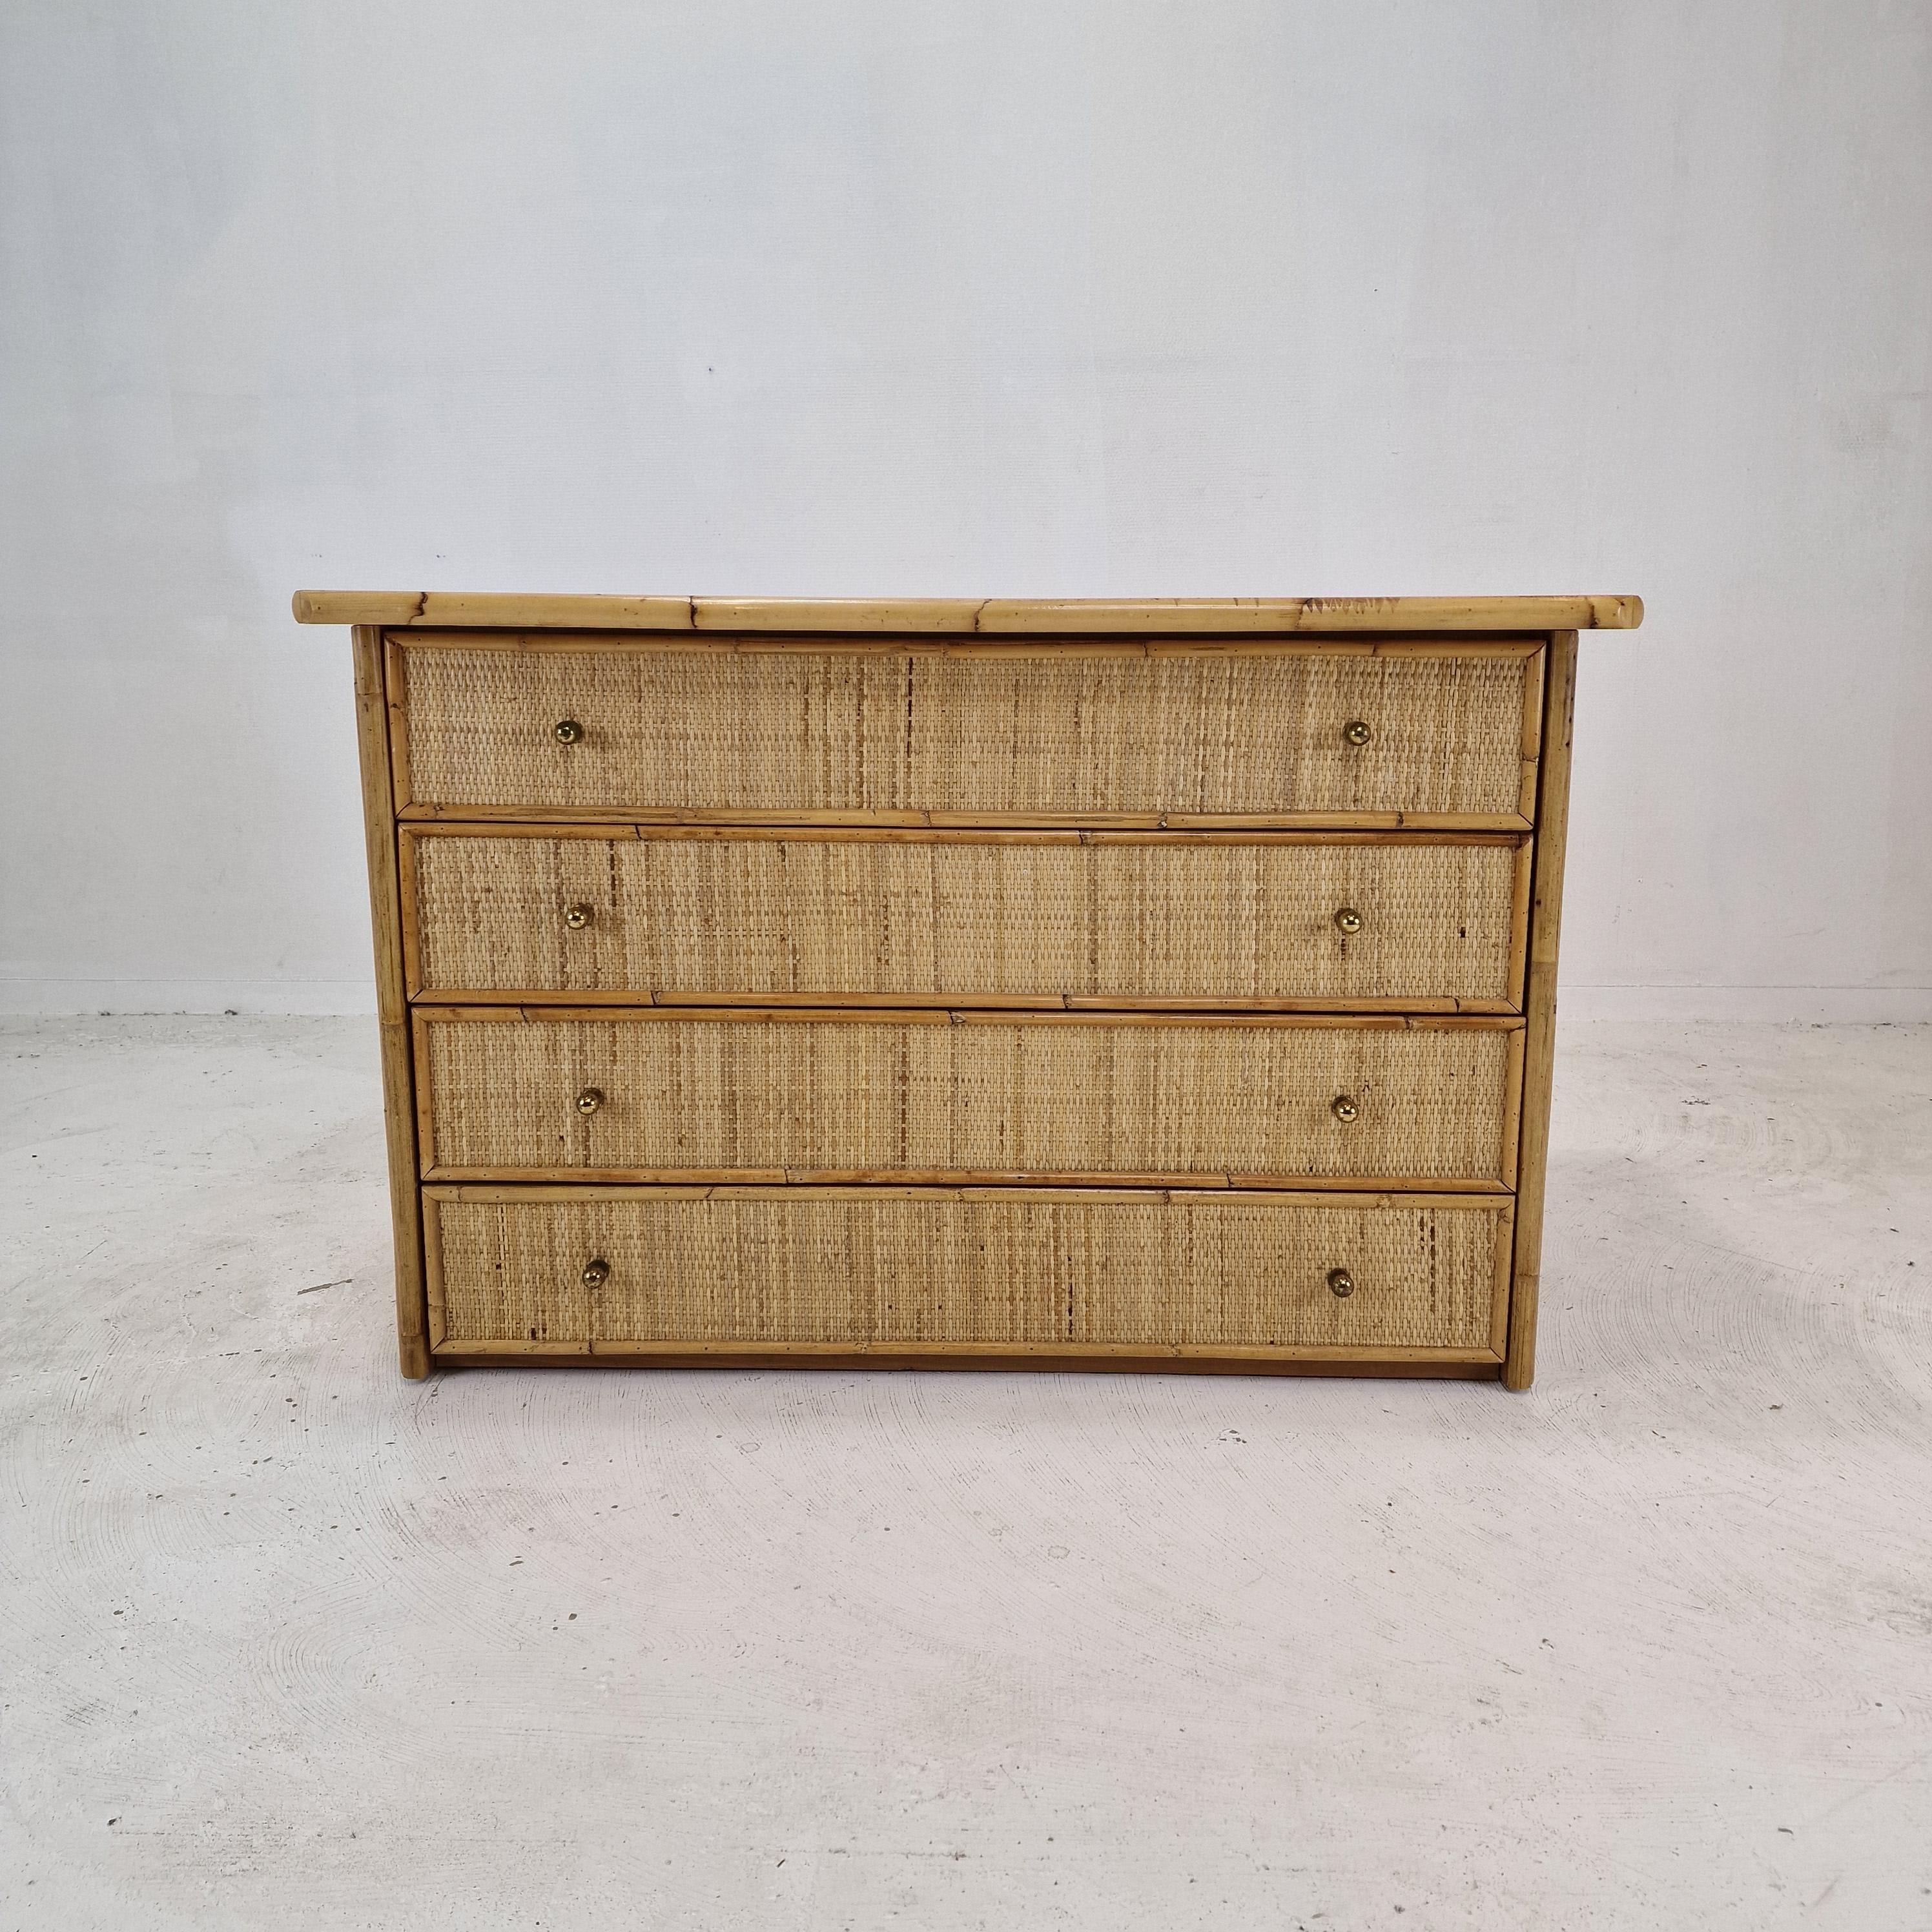 Lovely rectangle credenza or chest of drawers, fabricated in Italy in the 70's. 
This very nice credenza is made of bamboo and rattan.

Four drawers with nice brass grips.

We work with professional packers and shippers, we can deliver